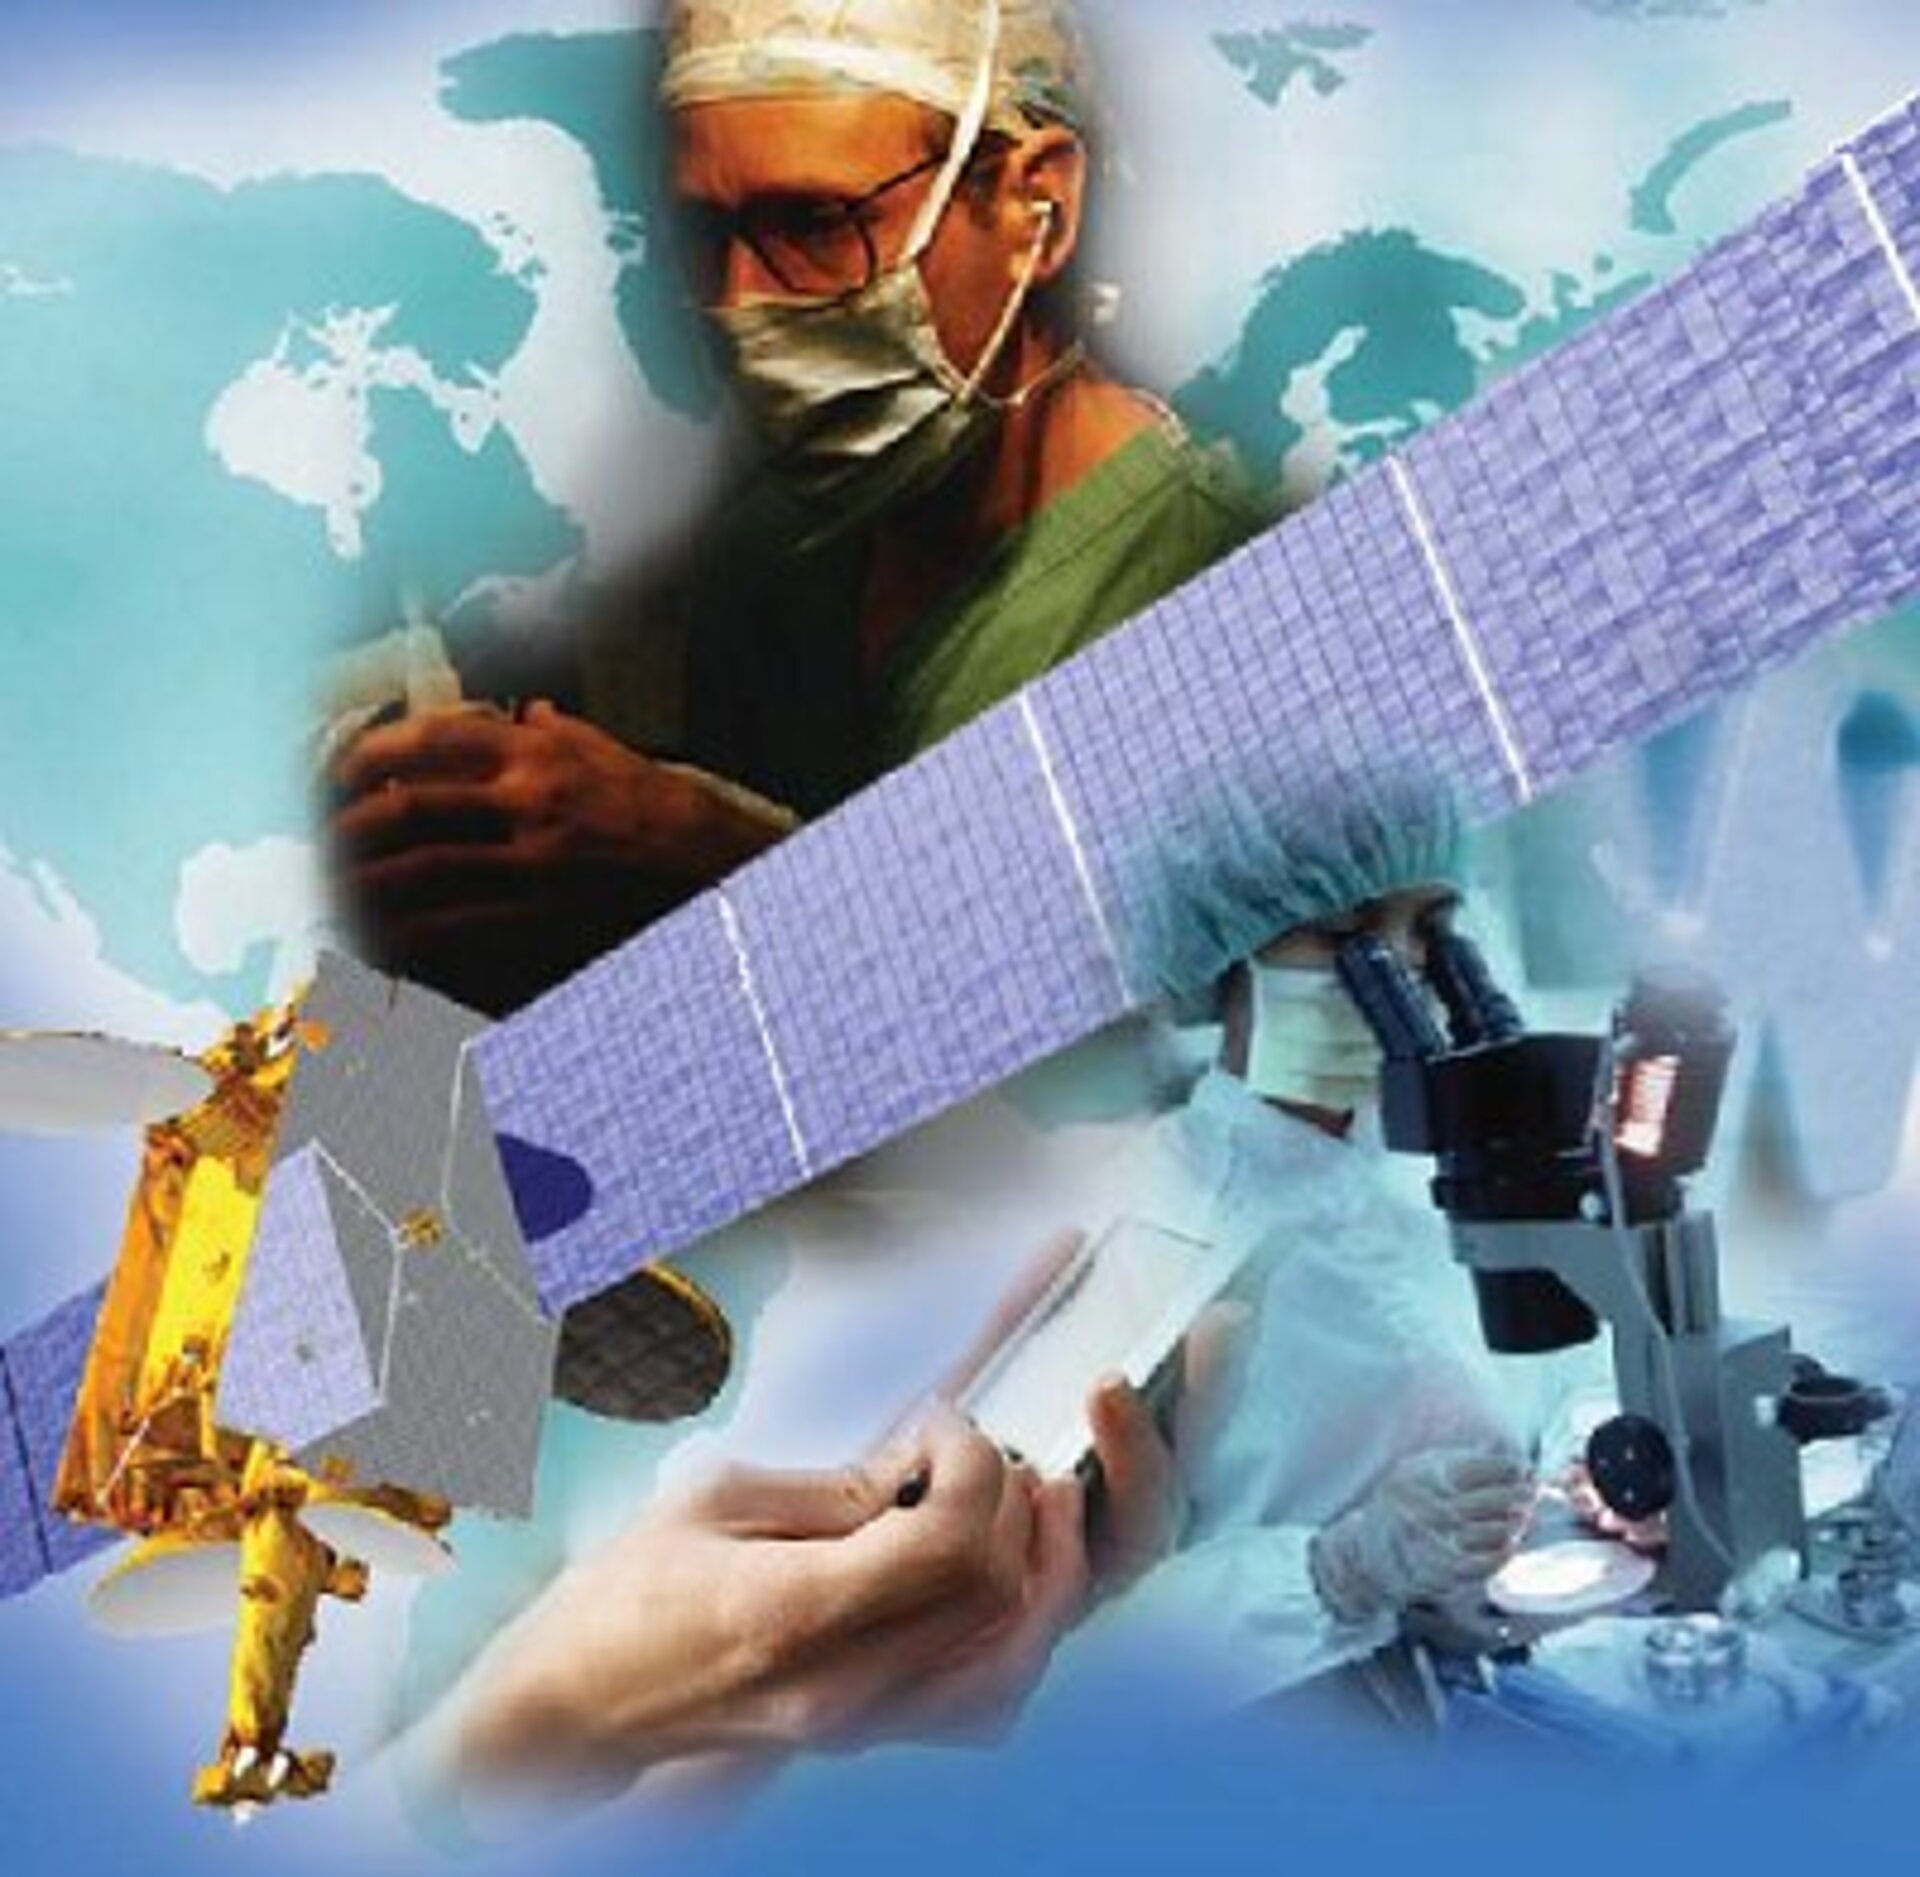 Satellite technology has a role in global healthcare